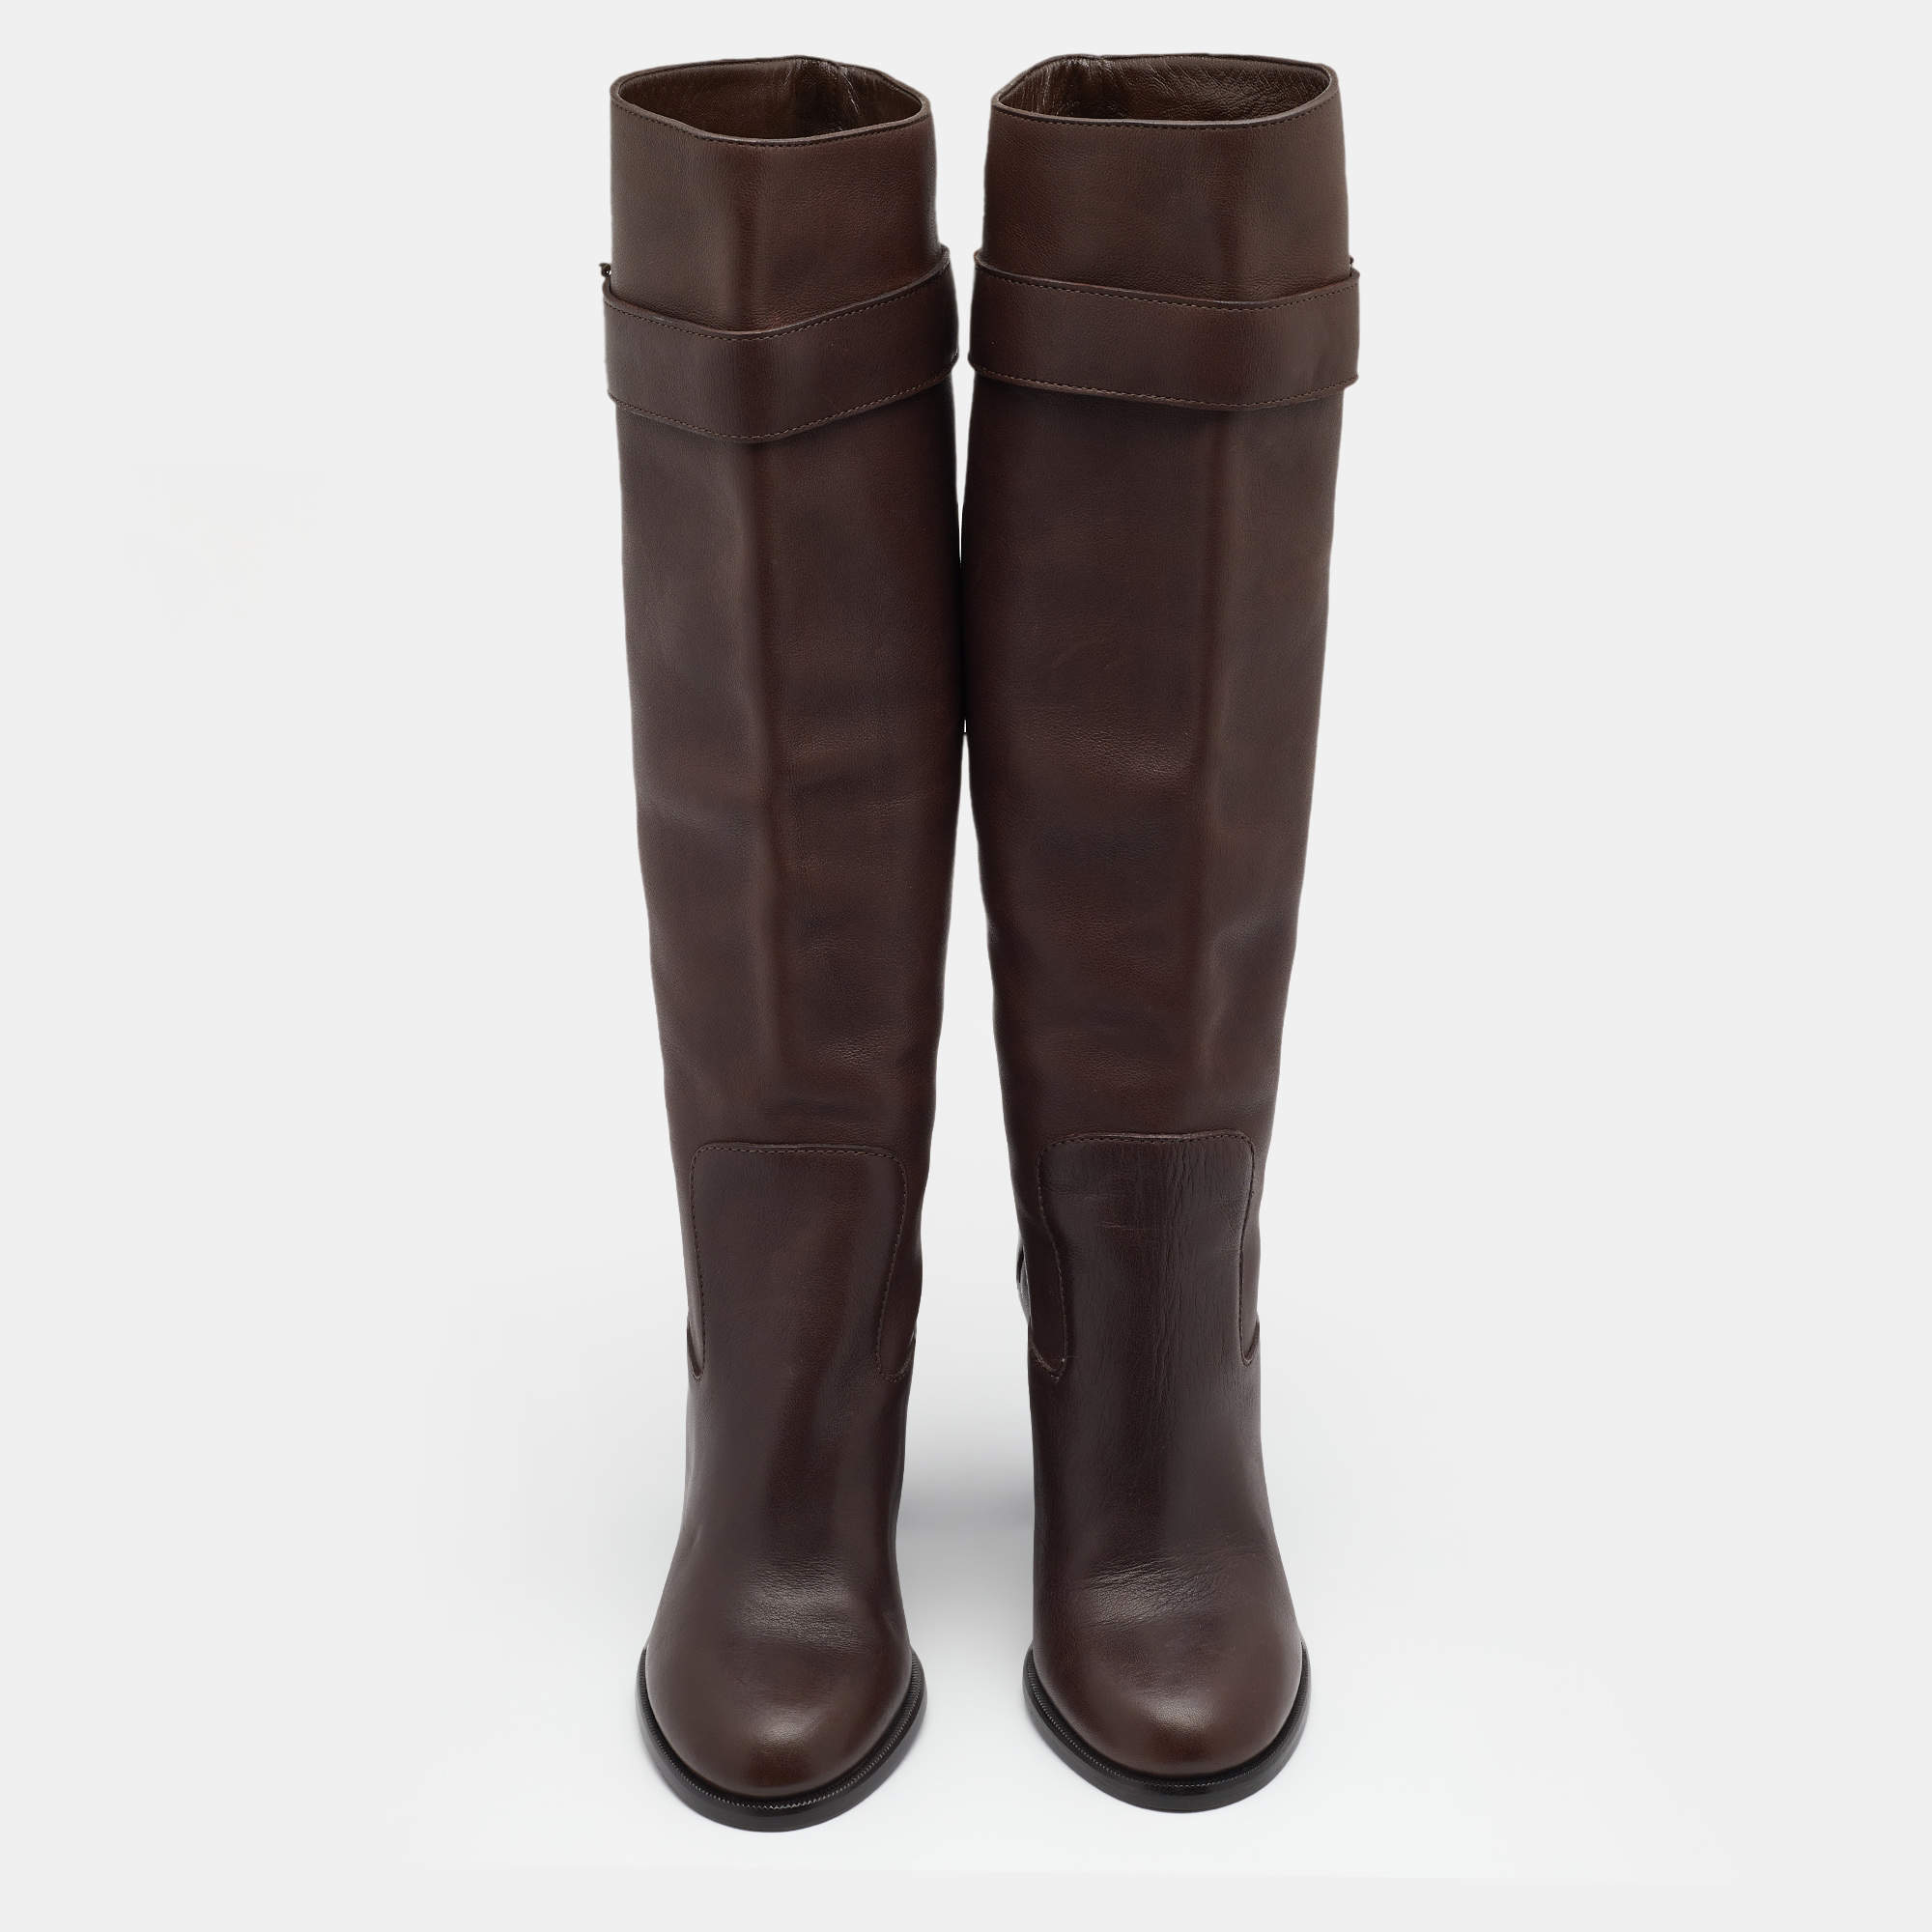 Leather boots Louis Vuitton Brown size 42.5 EU in Leather - 35634576